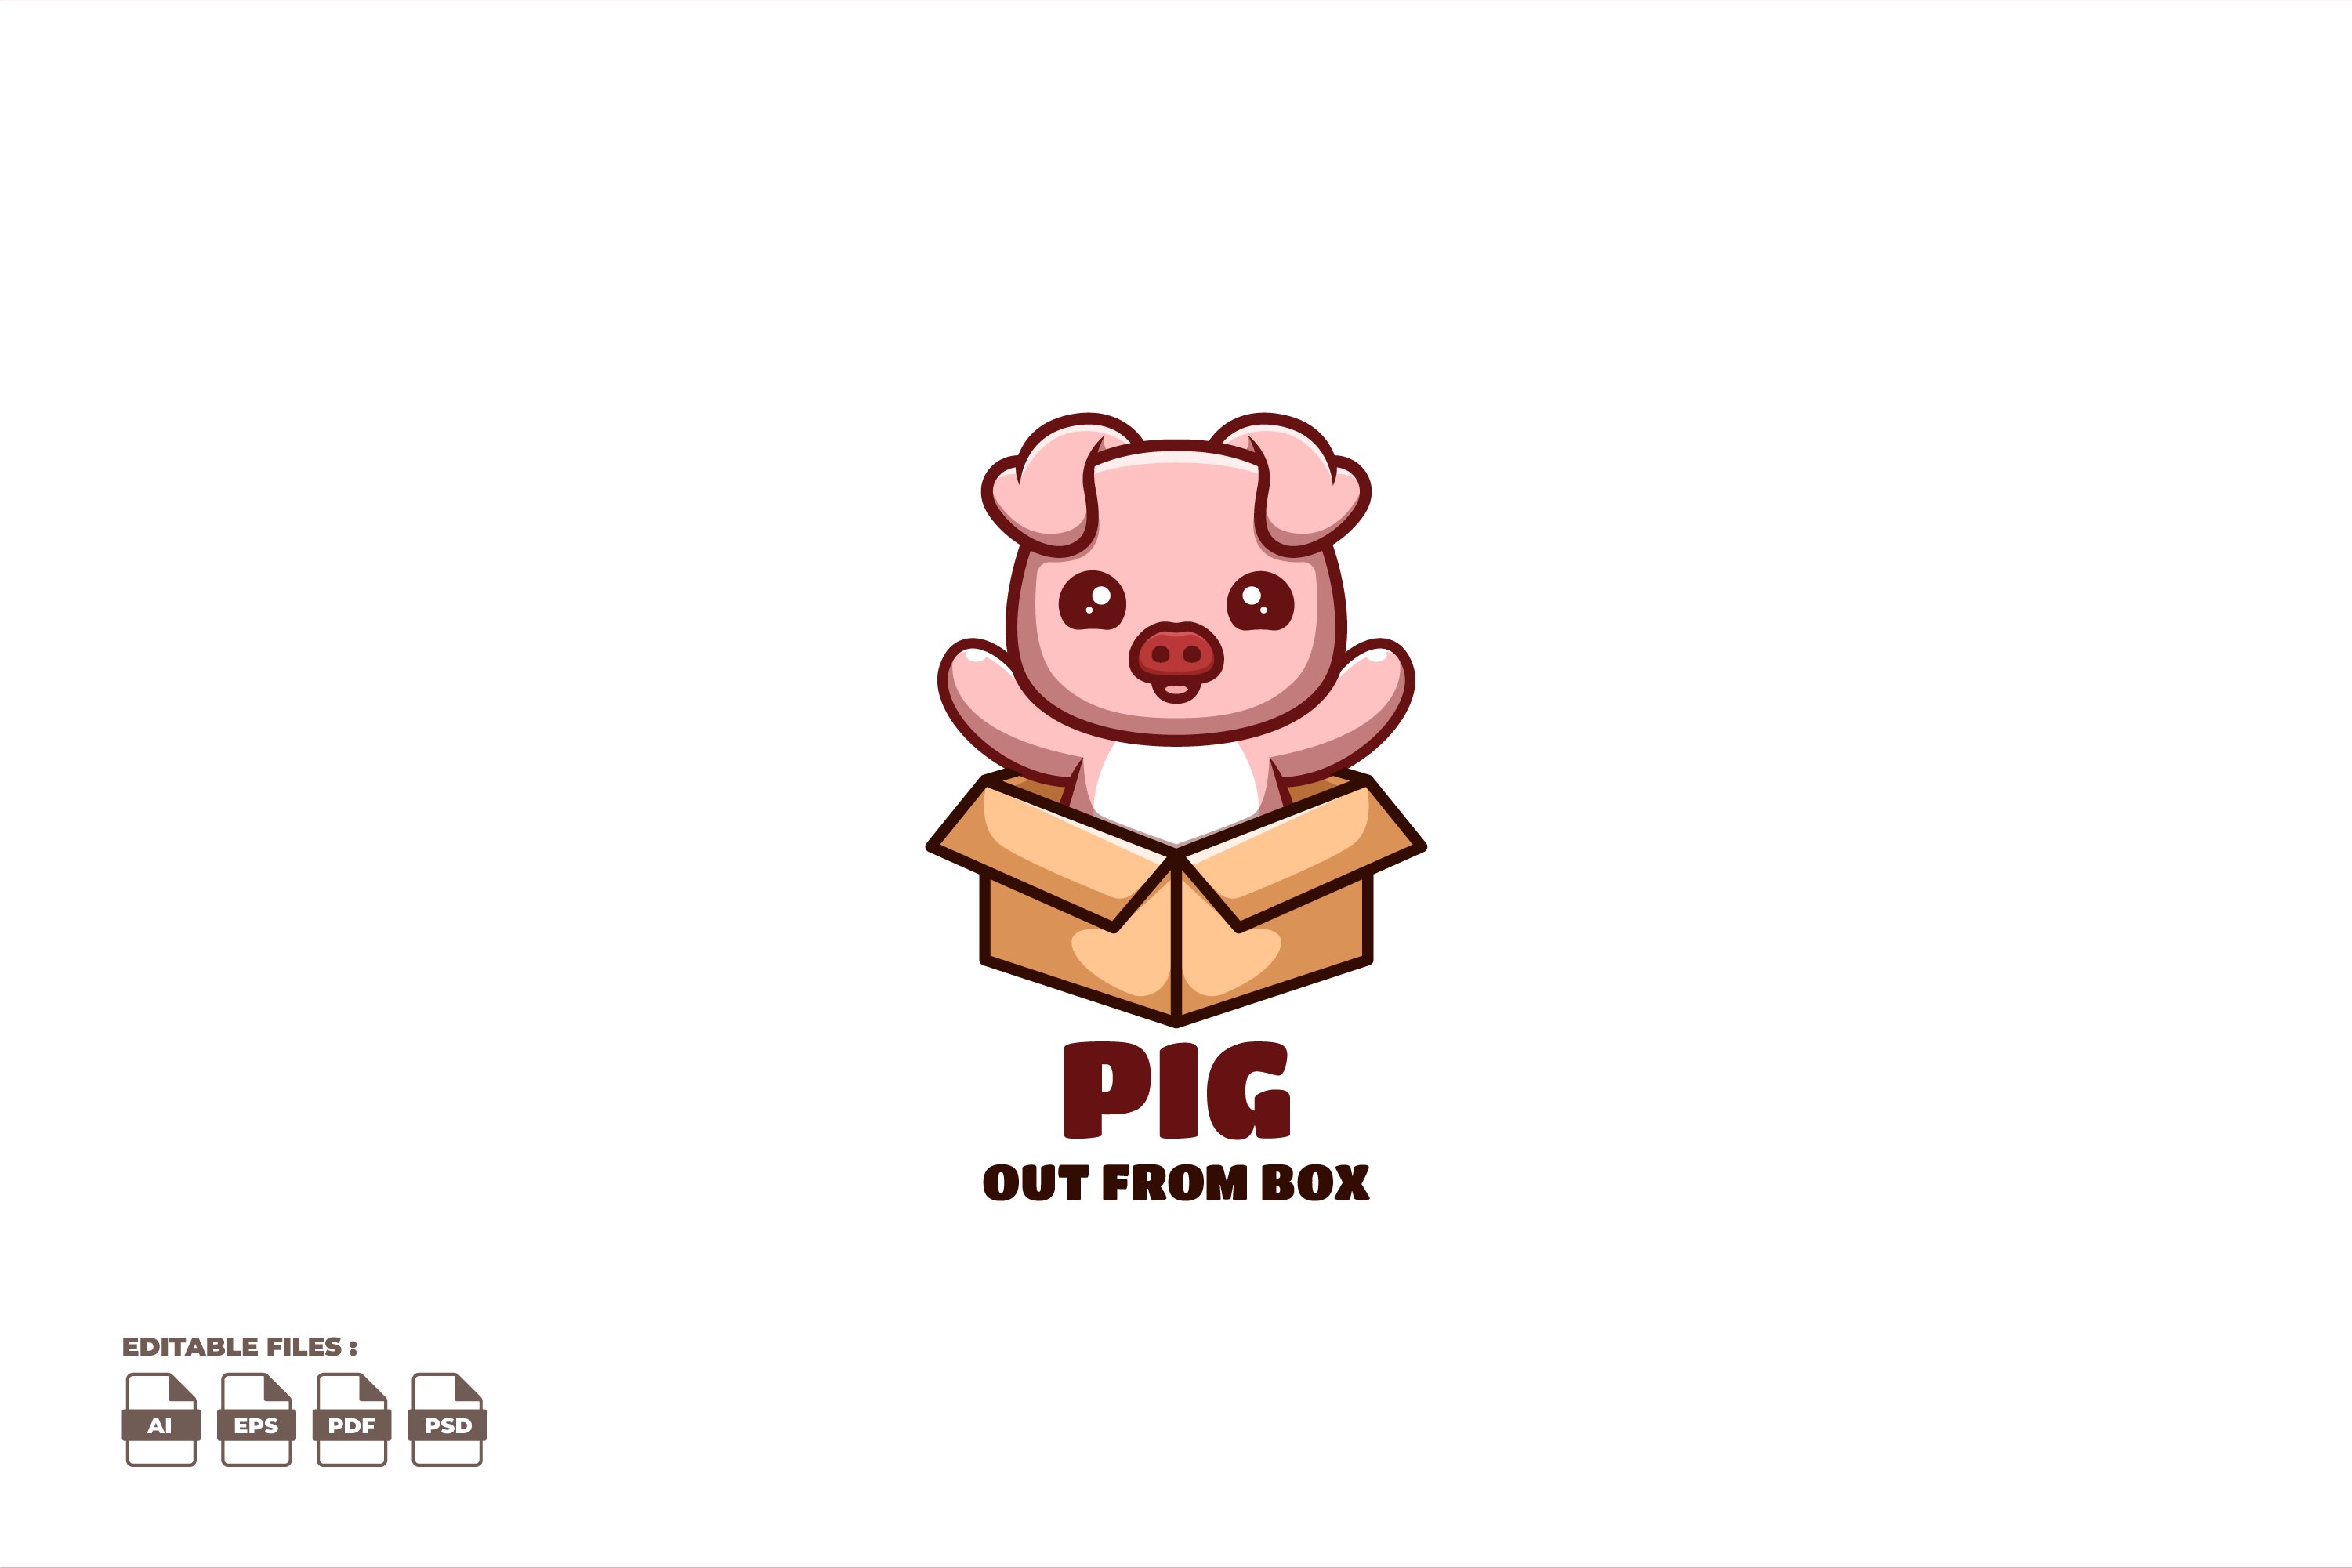 Out From Box Pig Cute Mascot Logo cover image.